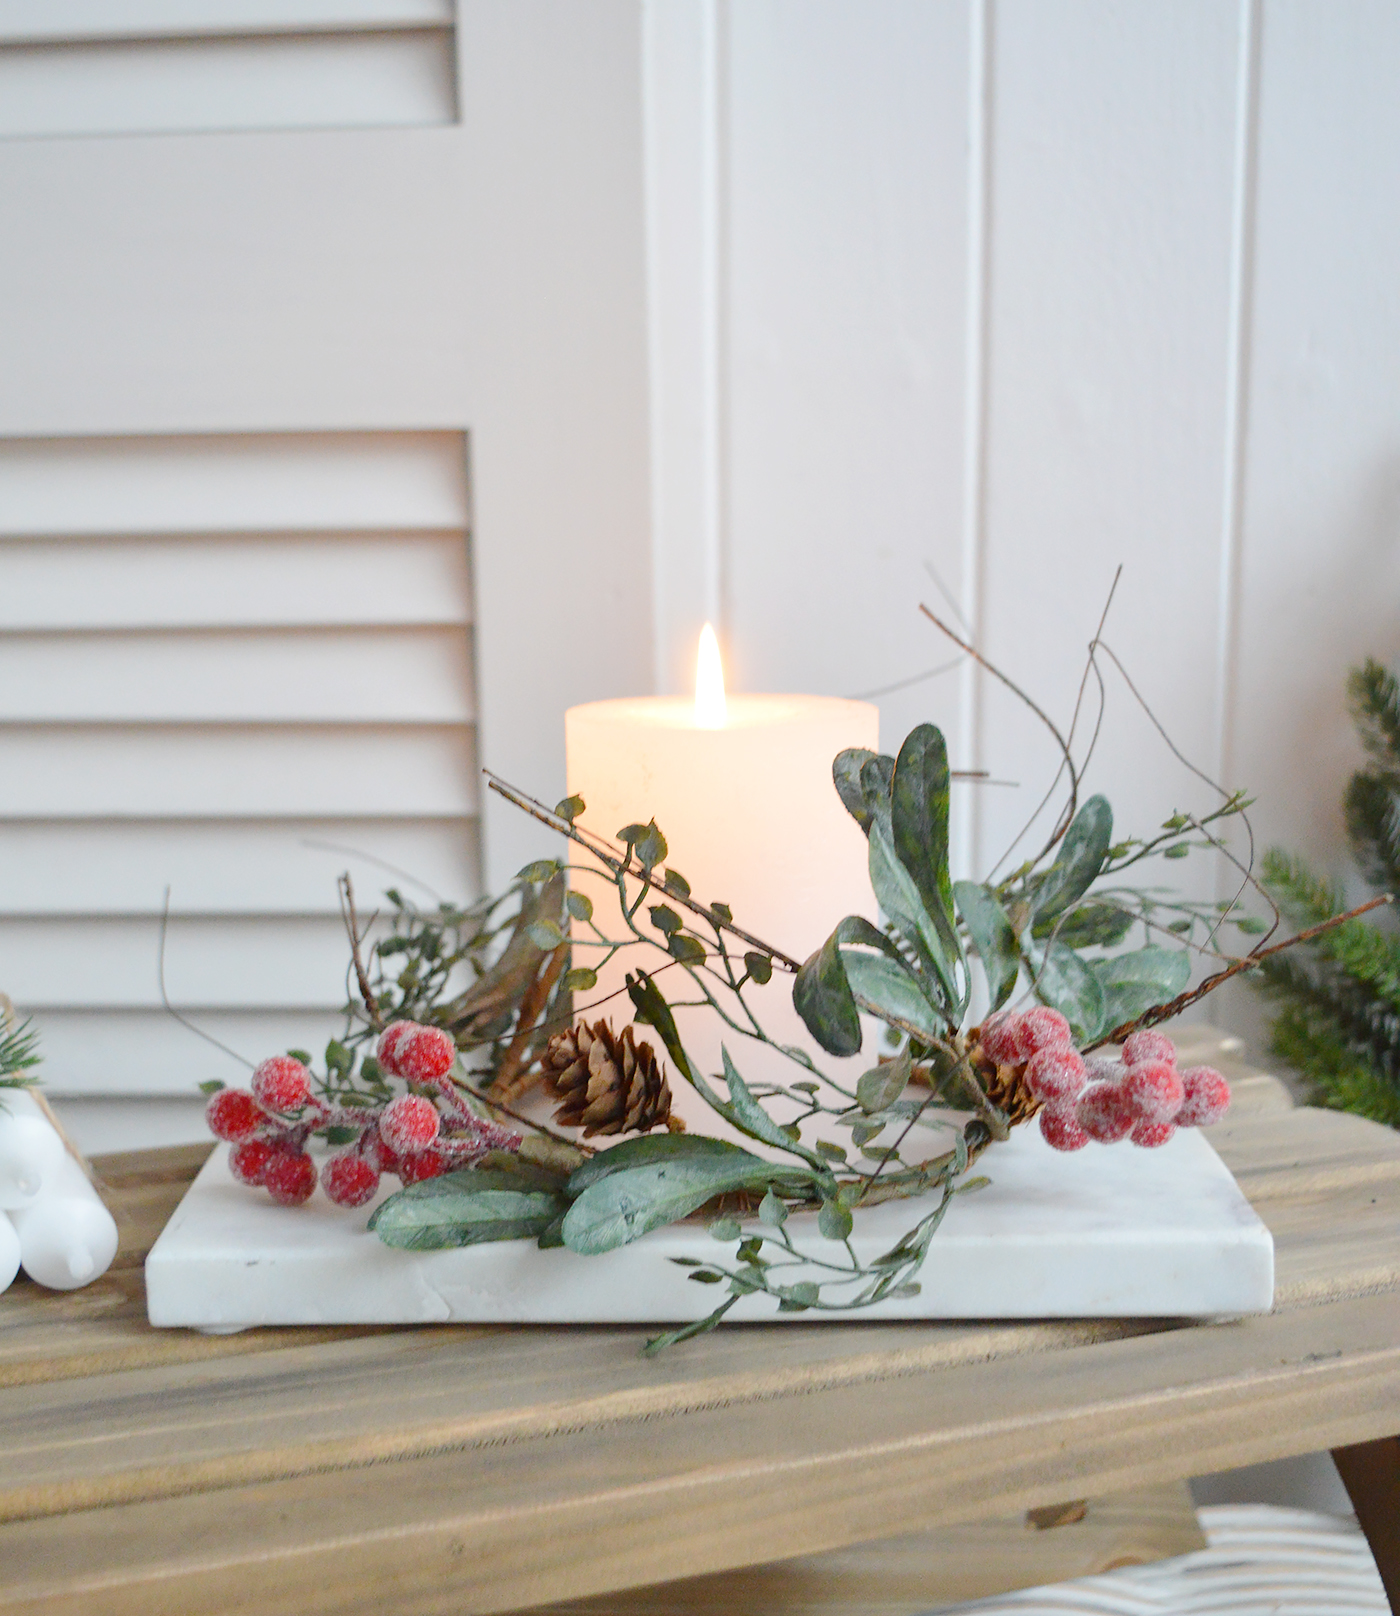 Create a beautiful centerpiece with this gorgeous winter candle ring with gently frosted leaves, little pinecones and contrasting red berries - Luxury Christmas table decoration from The White Lighhtouse New England Stlye homes and interiors